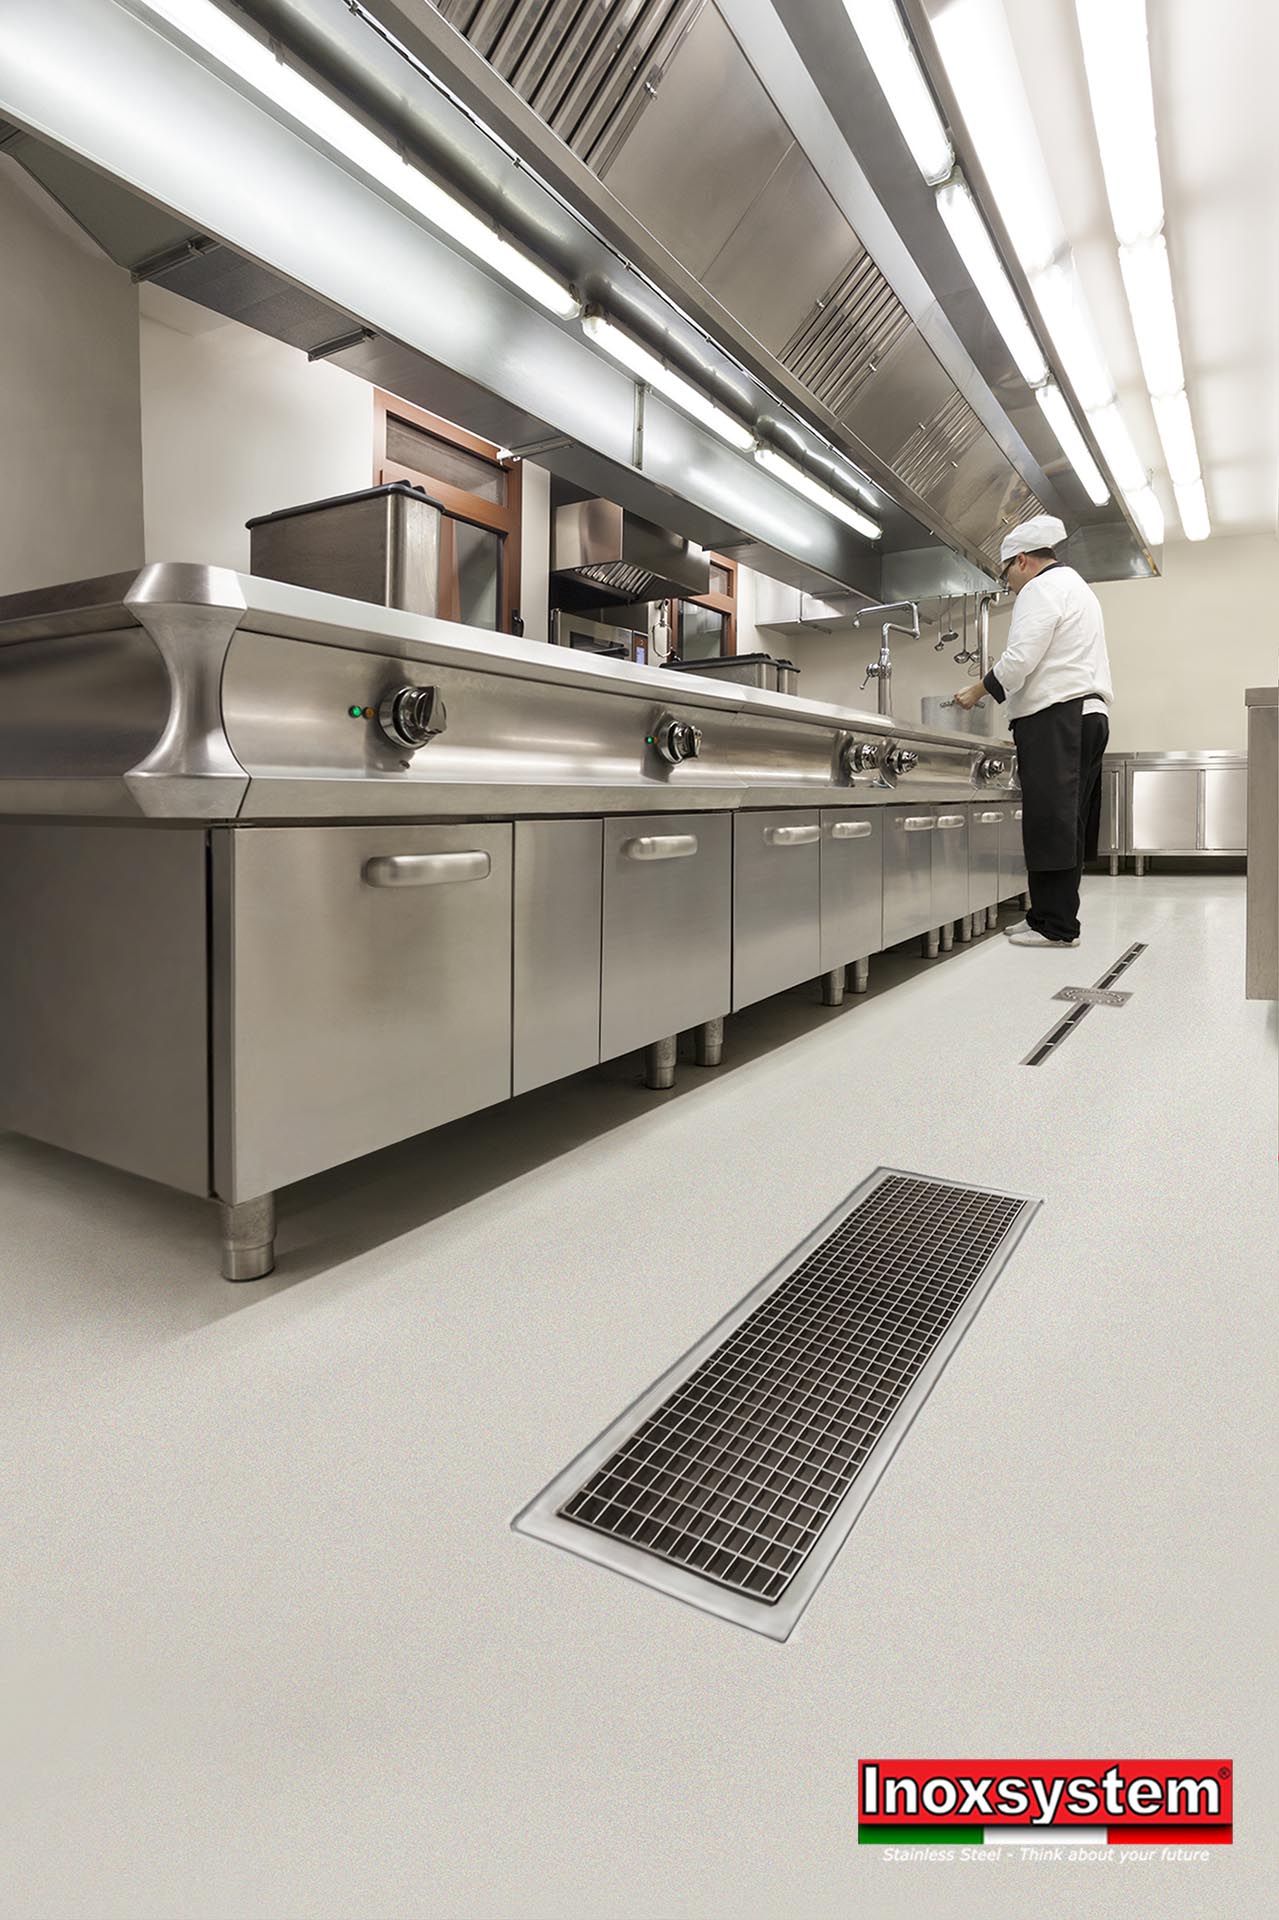 drainage systems for restaurant kitchens with haccp certification